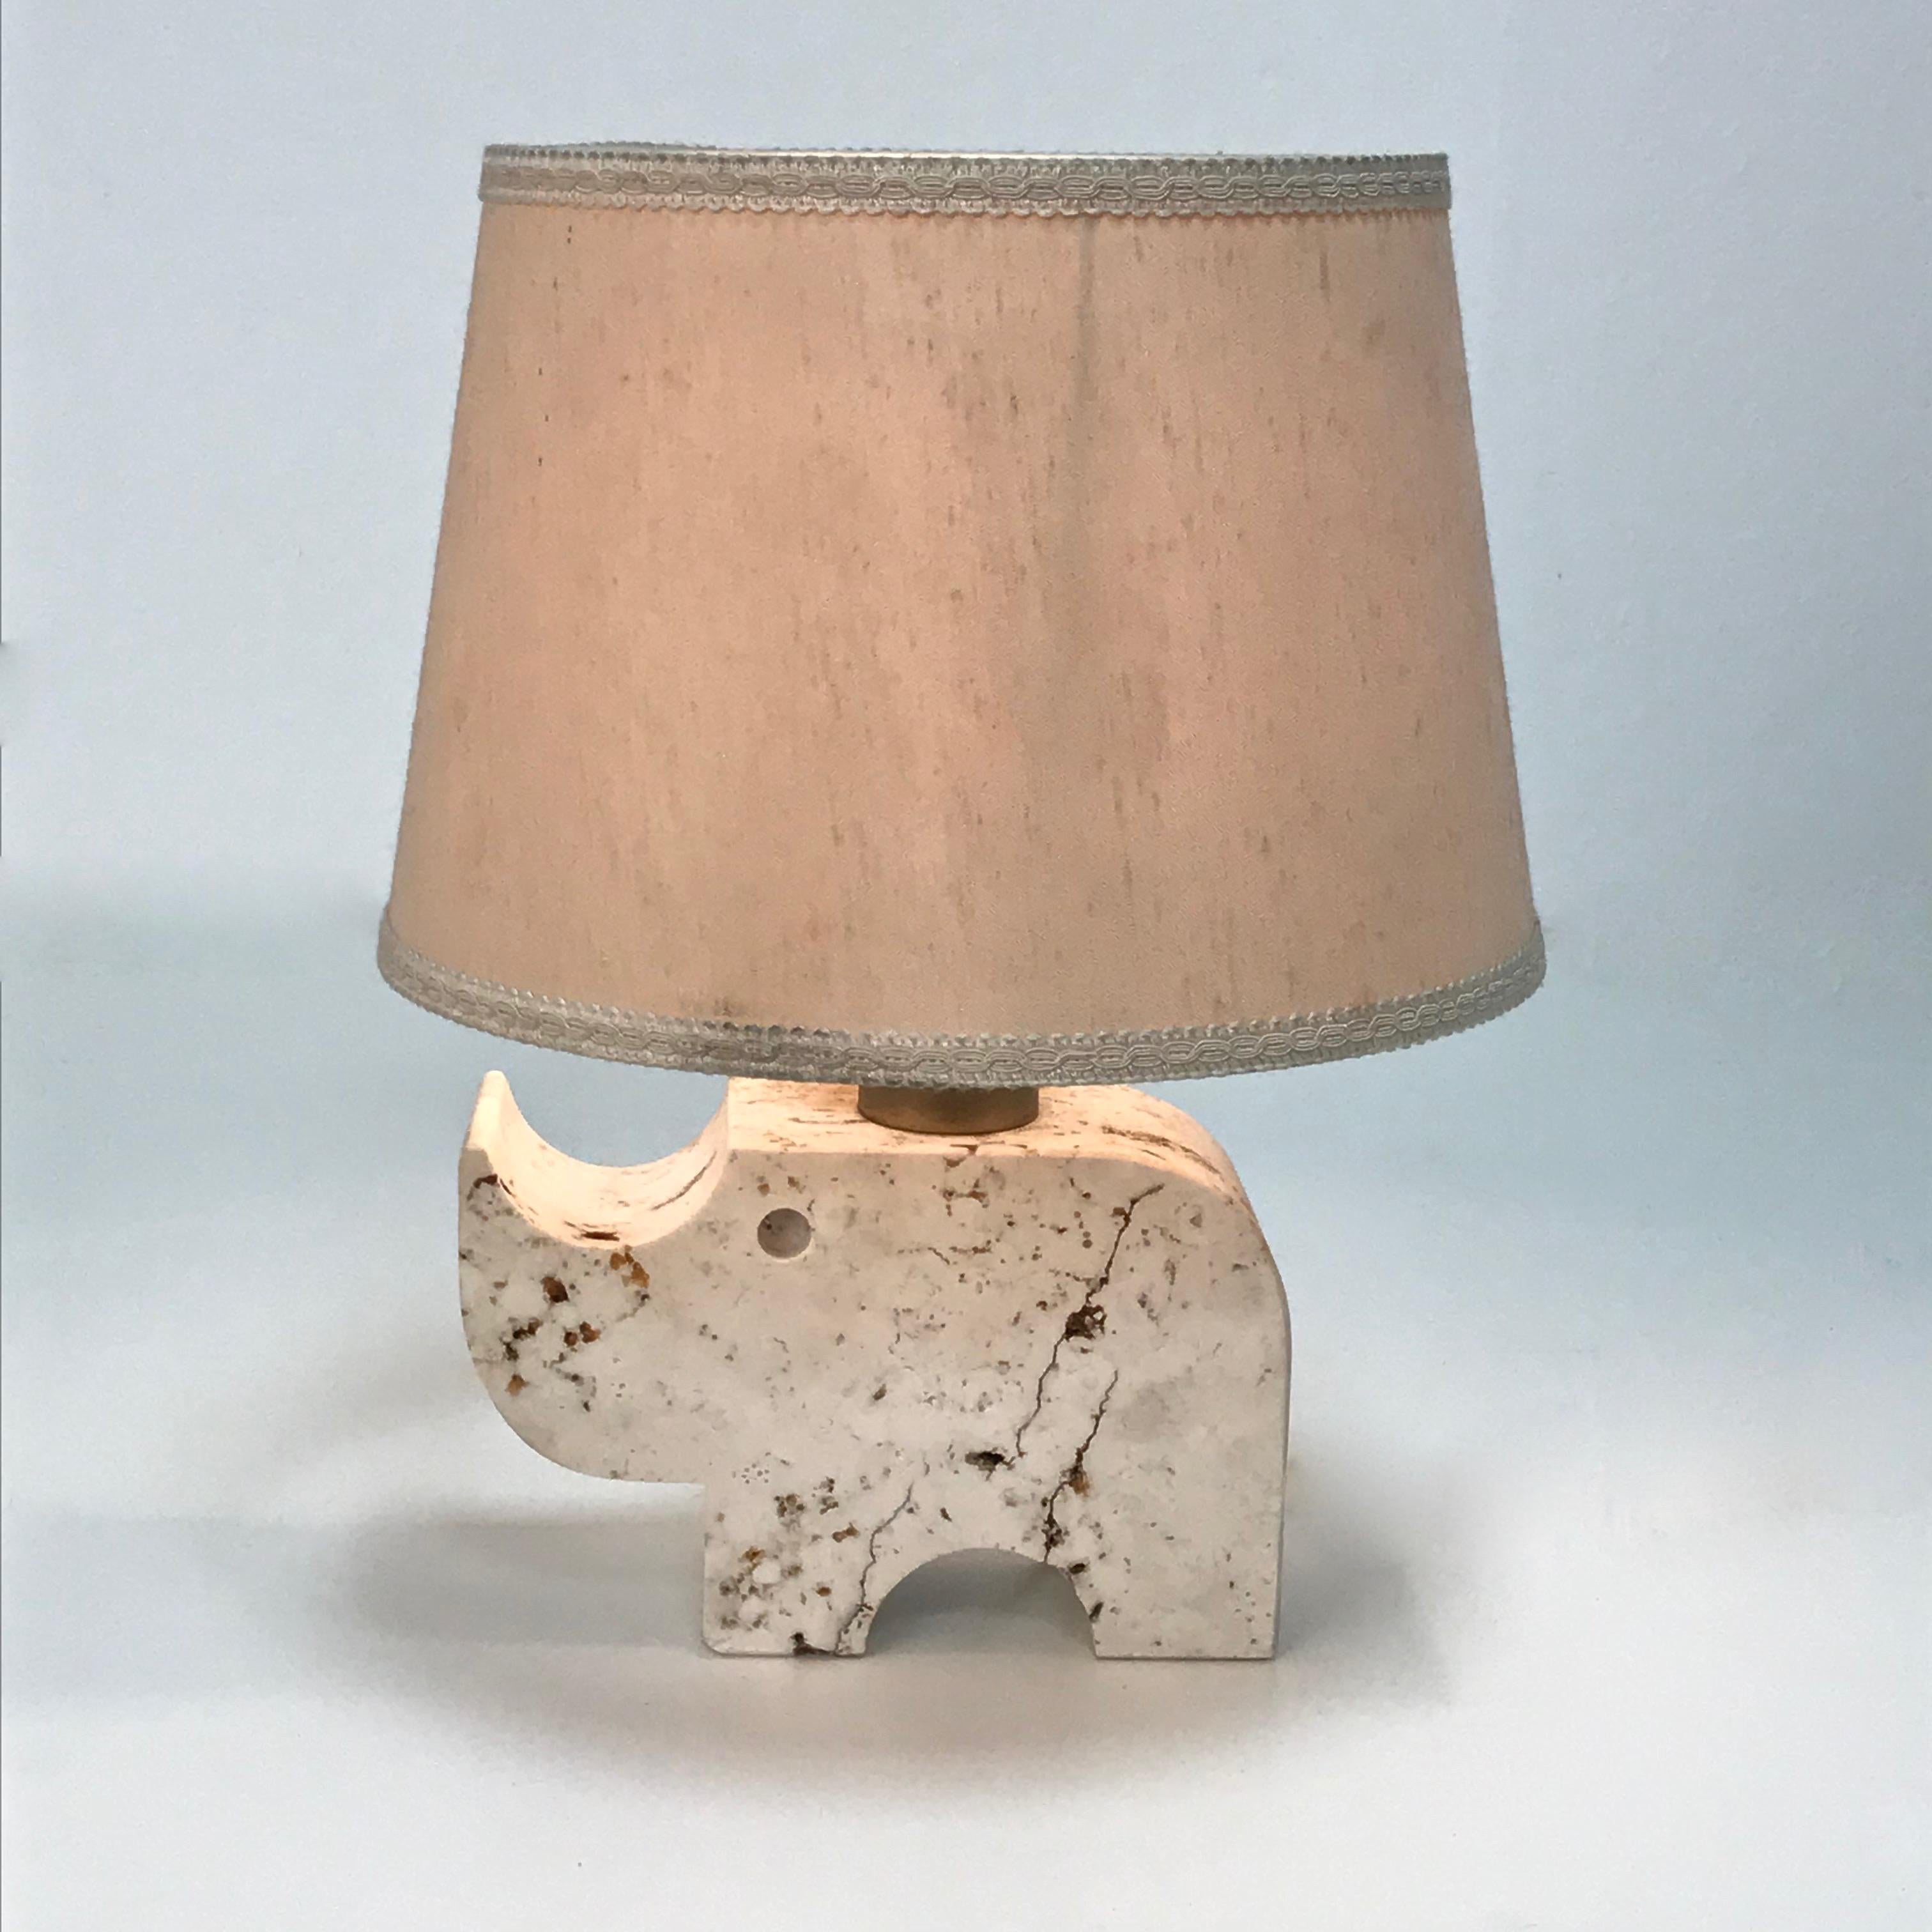 Table lamp in the shape of an rhinoceros in travertine produced by Fratelli Manelli in Italy, circa 1970s. Stem in chromed brass. Original cable Lampshade in customized linen included. It takes a bulb E27 100w at most.